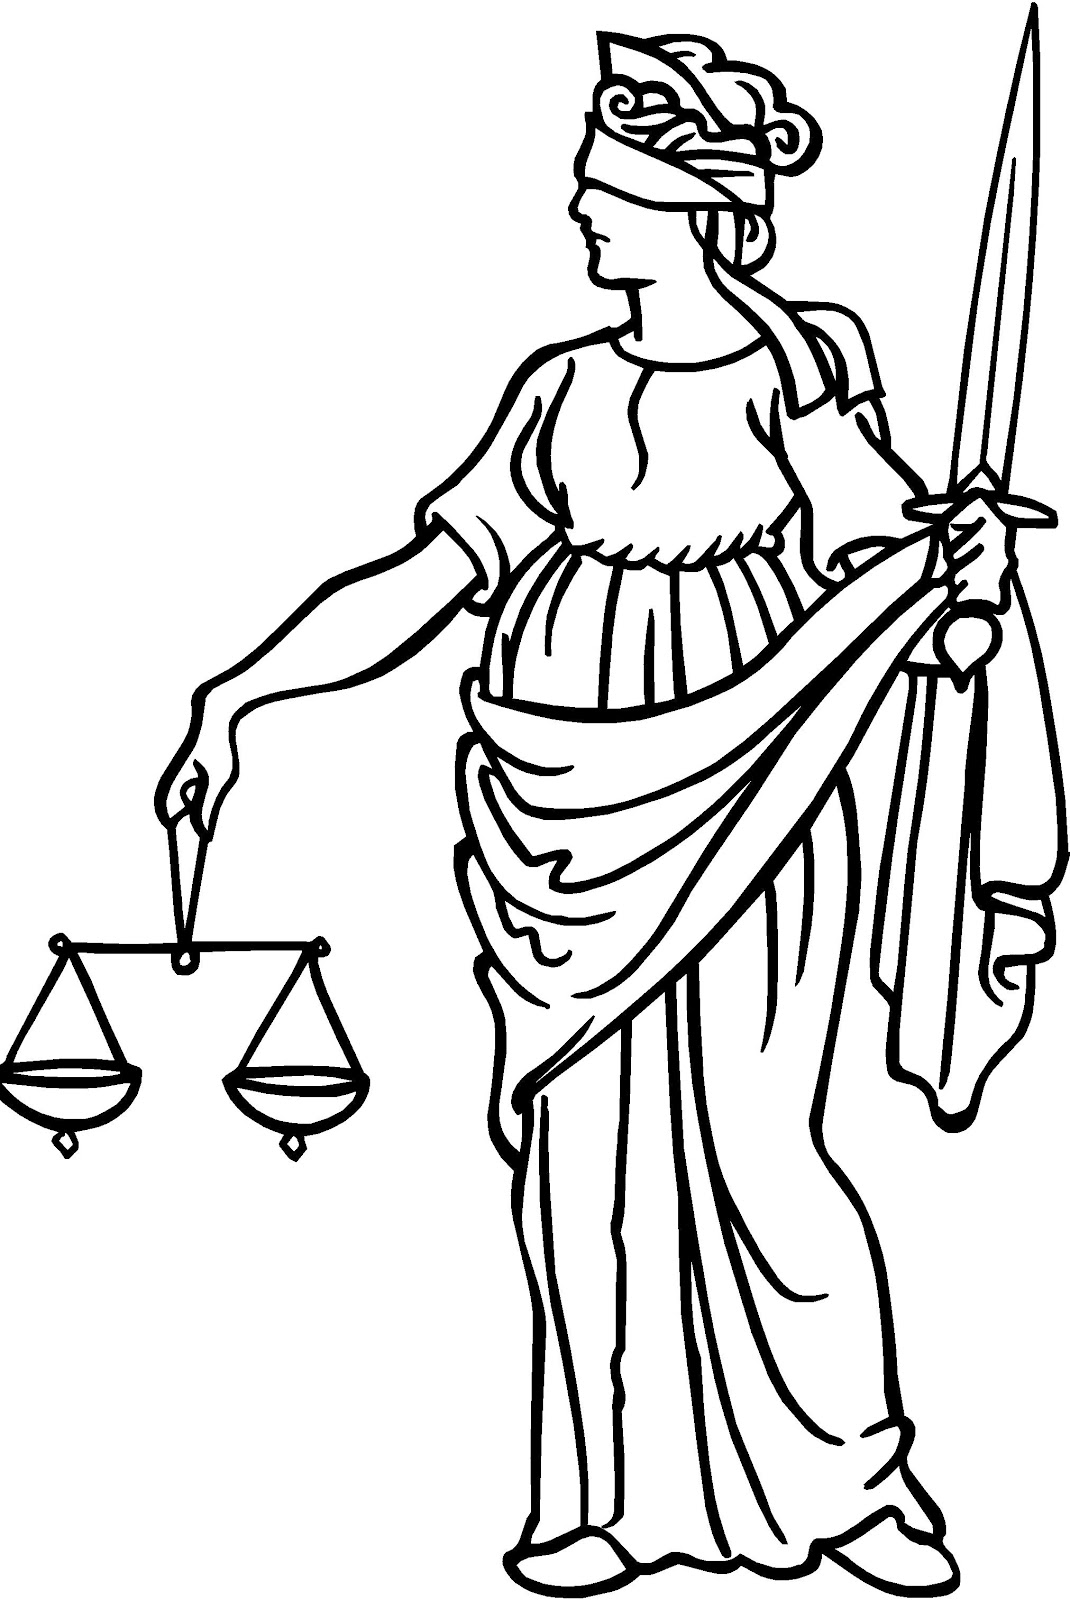 Images Of Scales Of Justice - ClipArt Best